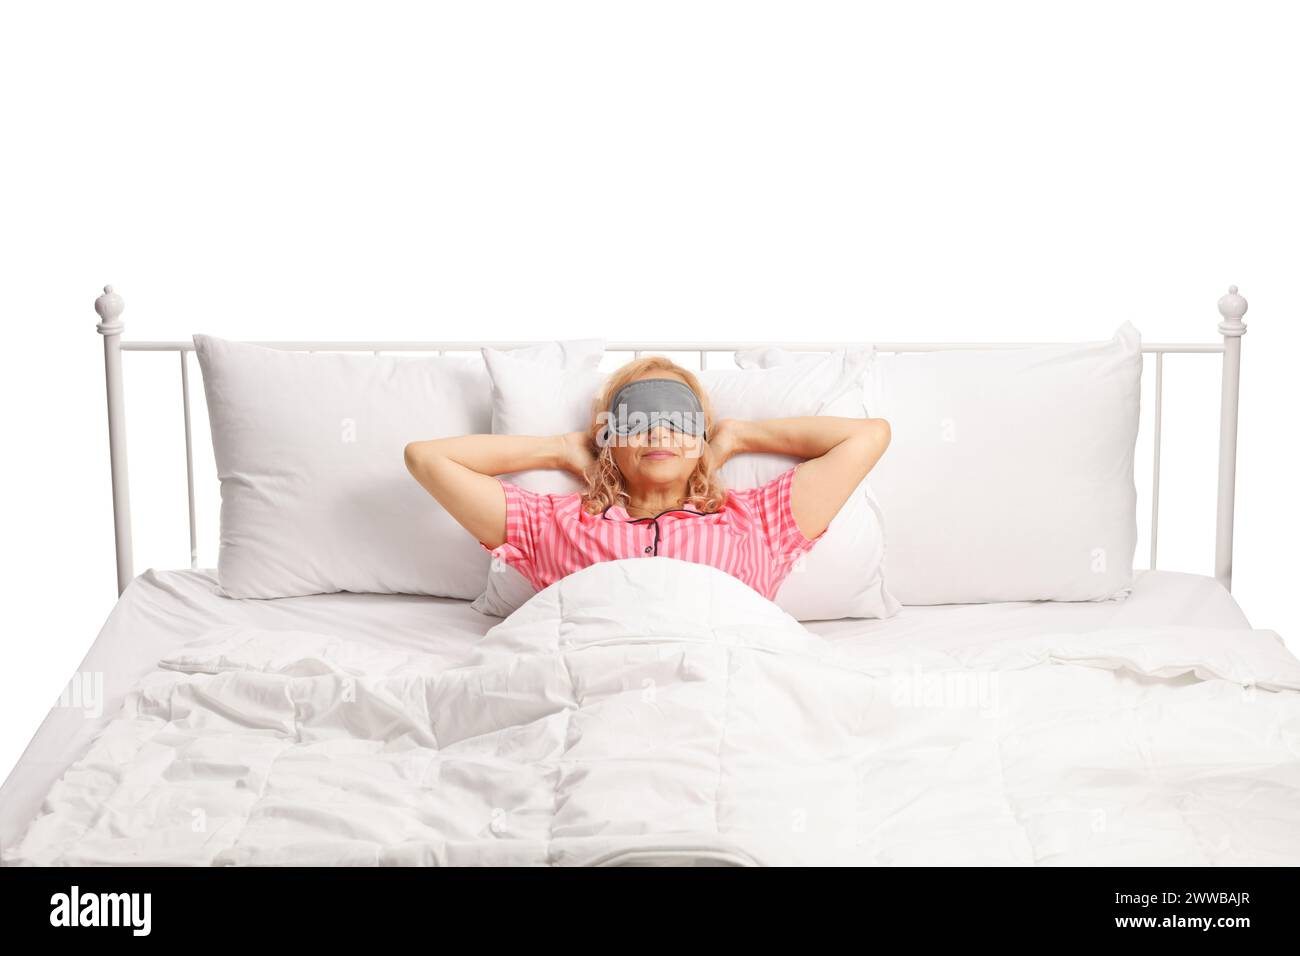 Woman resting in a bed with mask over eyes isolated on white background Stock Photo